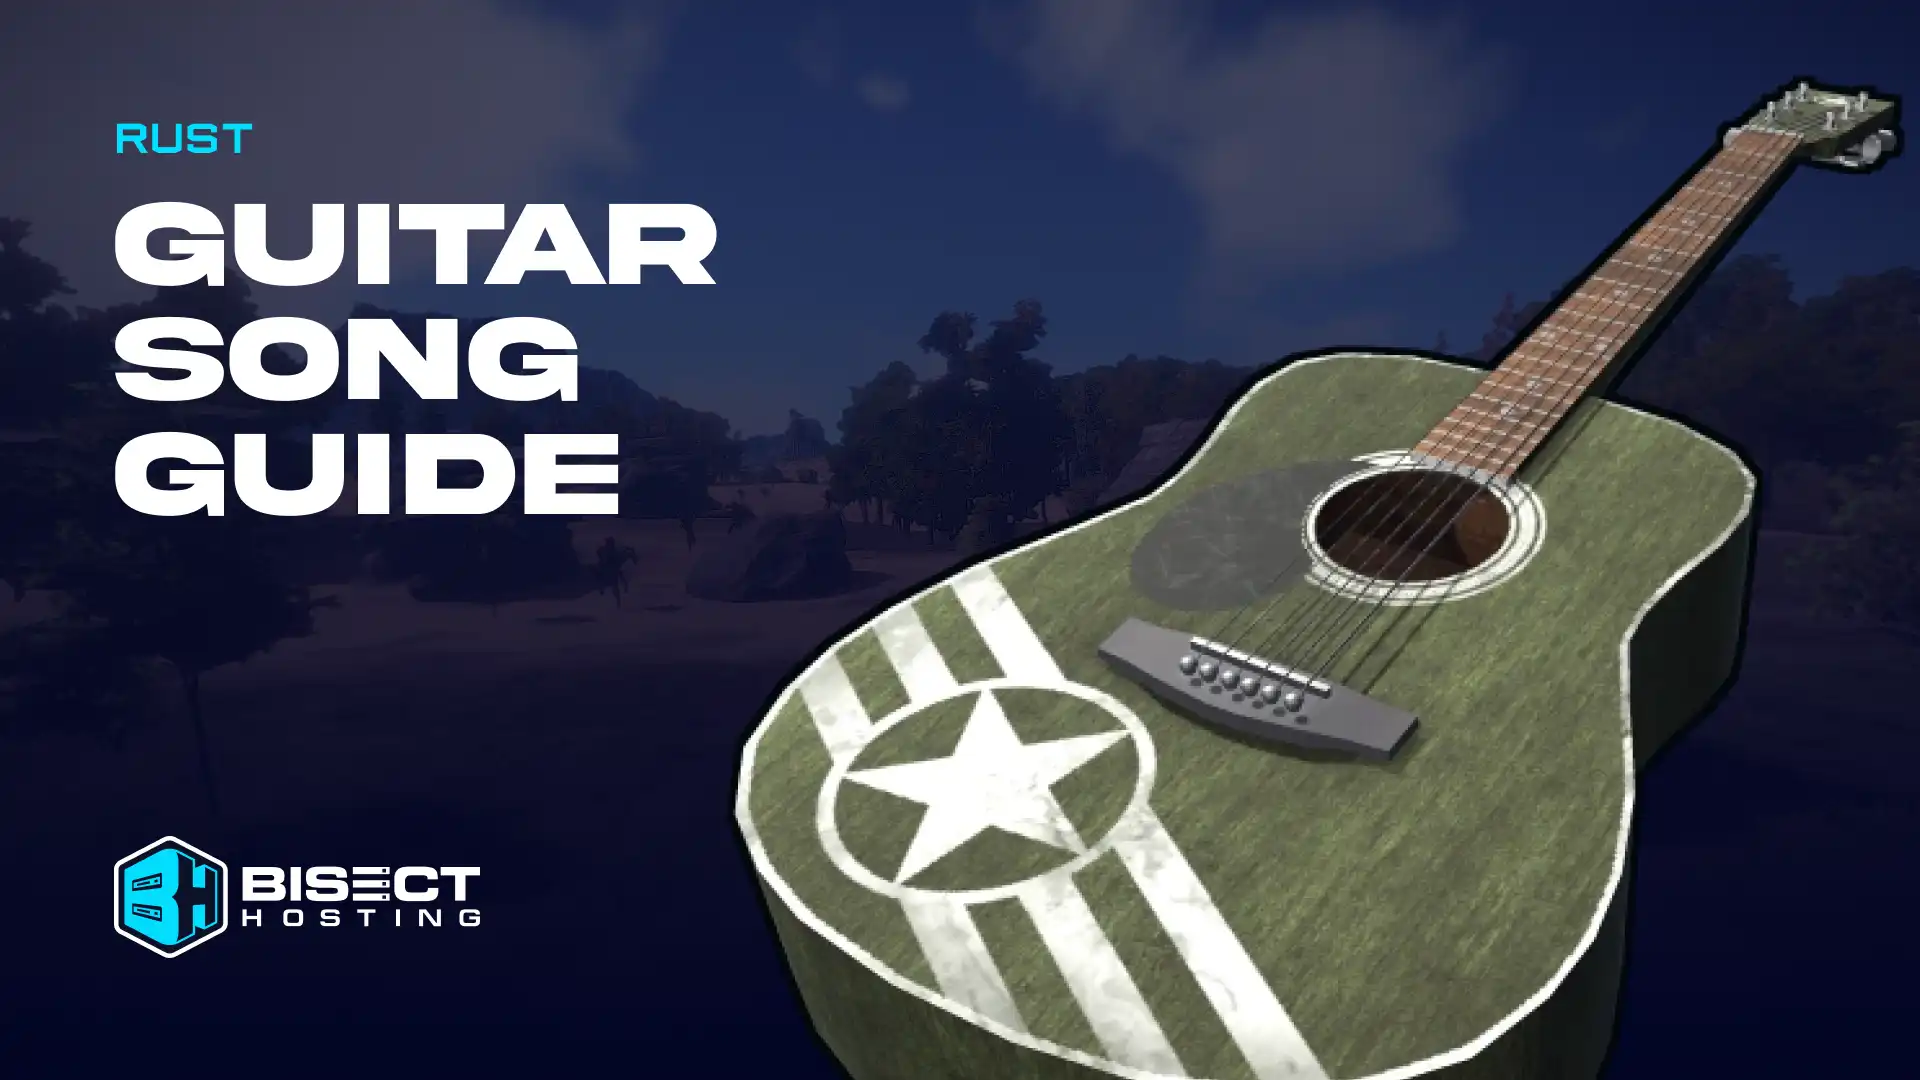 Rust Guitar Songs Guide: How to Play & Song Tabs